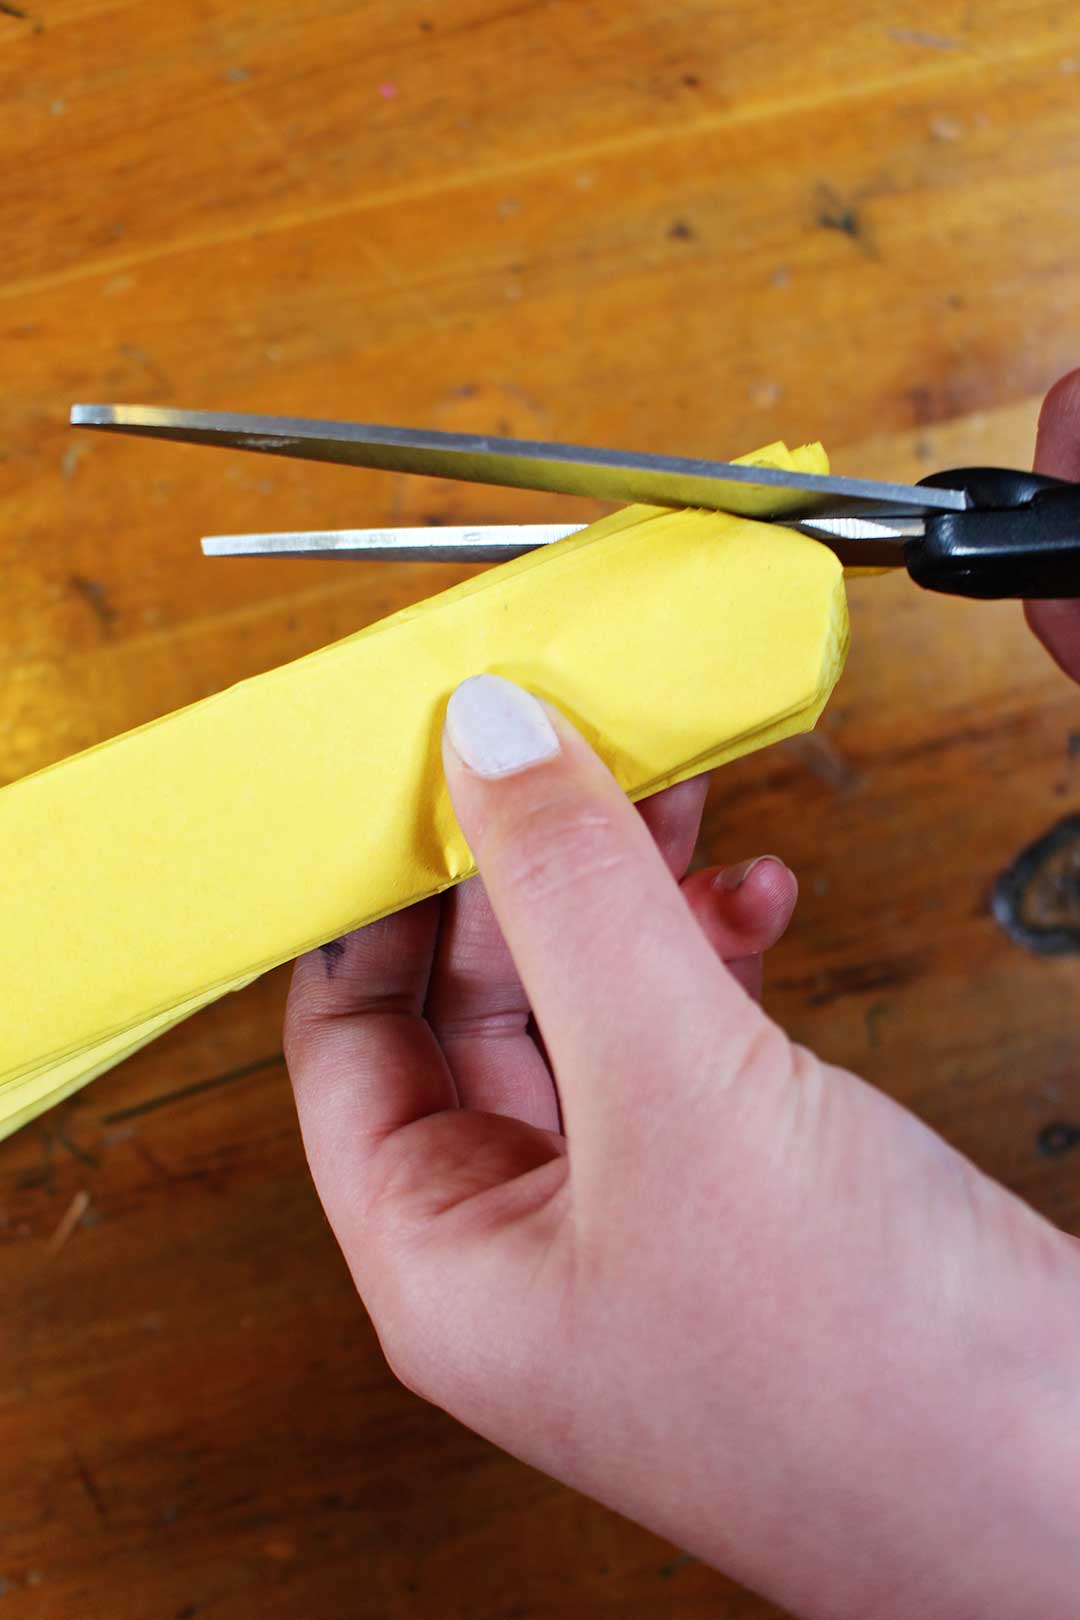 A hand cutting the ends of the folded yellow tissue paper to a rounded edge with scissors.